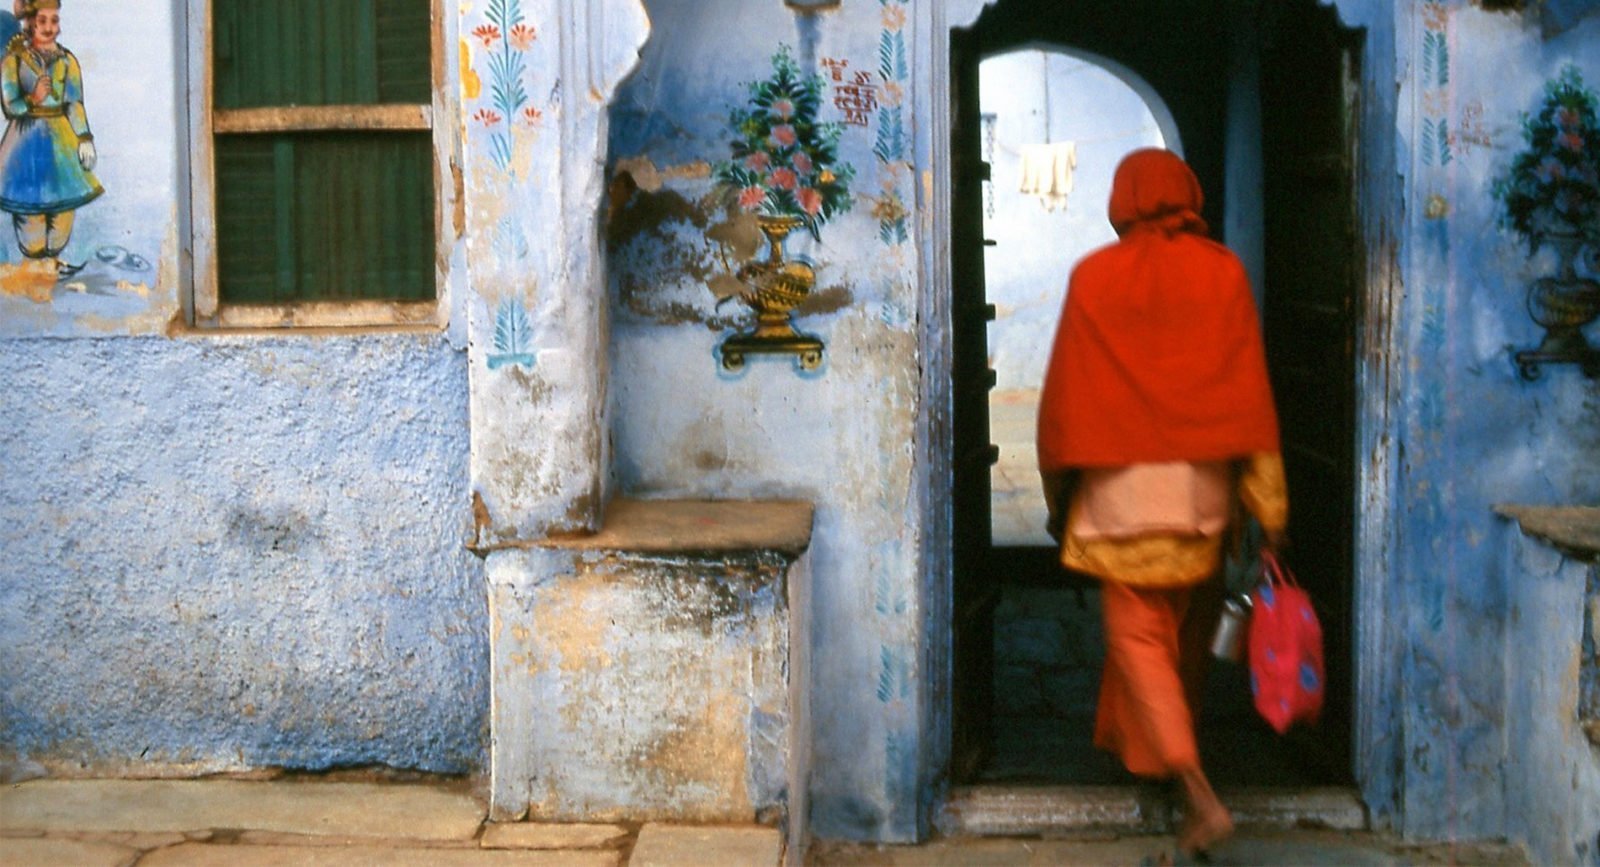 A person dressed in red walking through a blue doorway in India